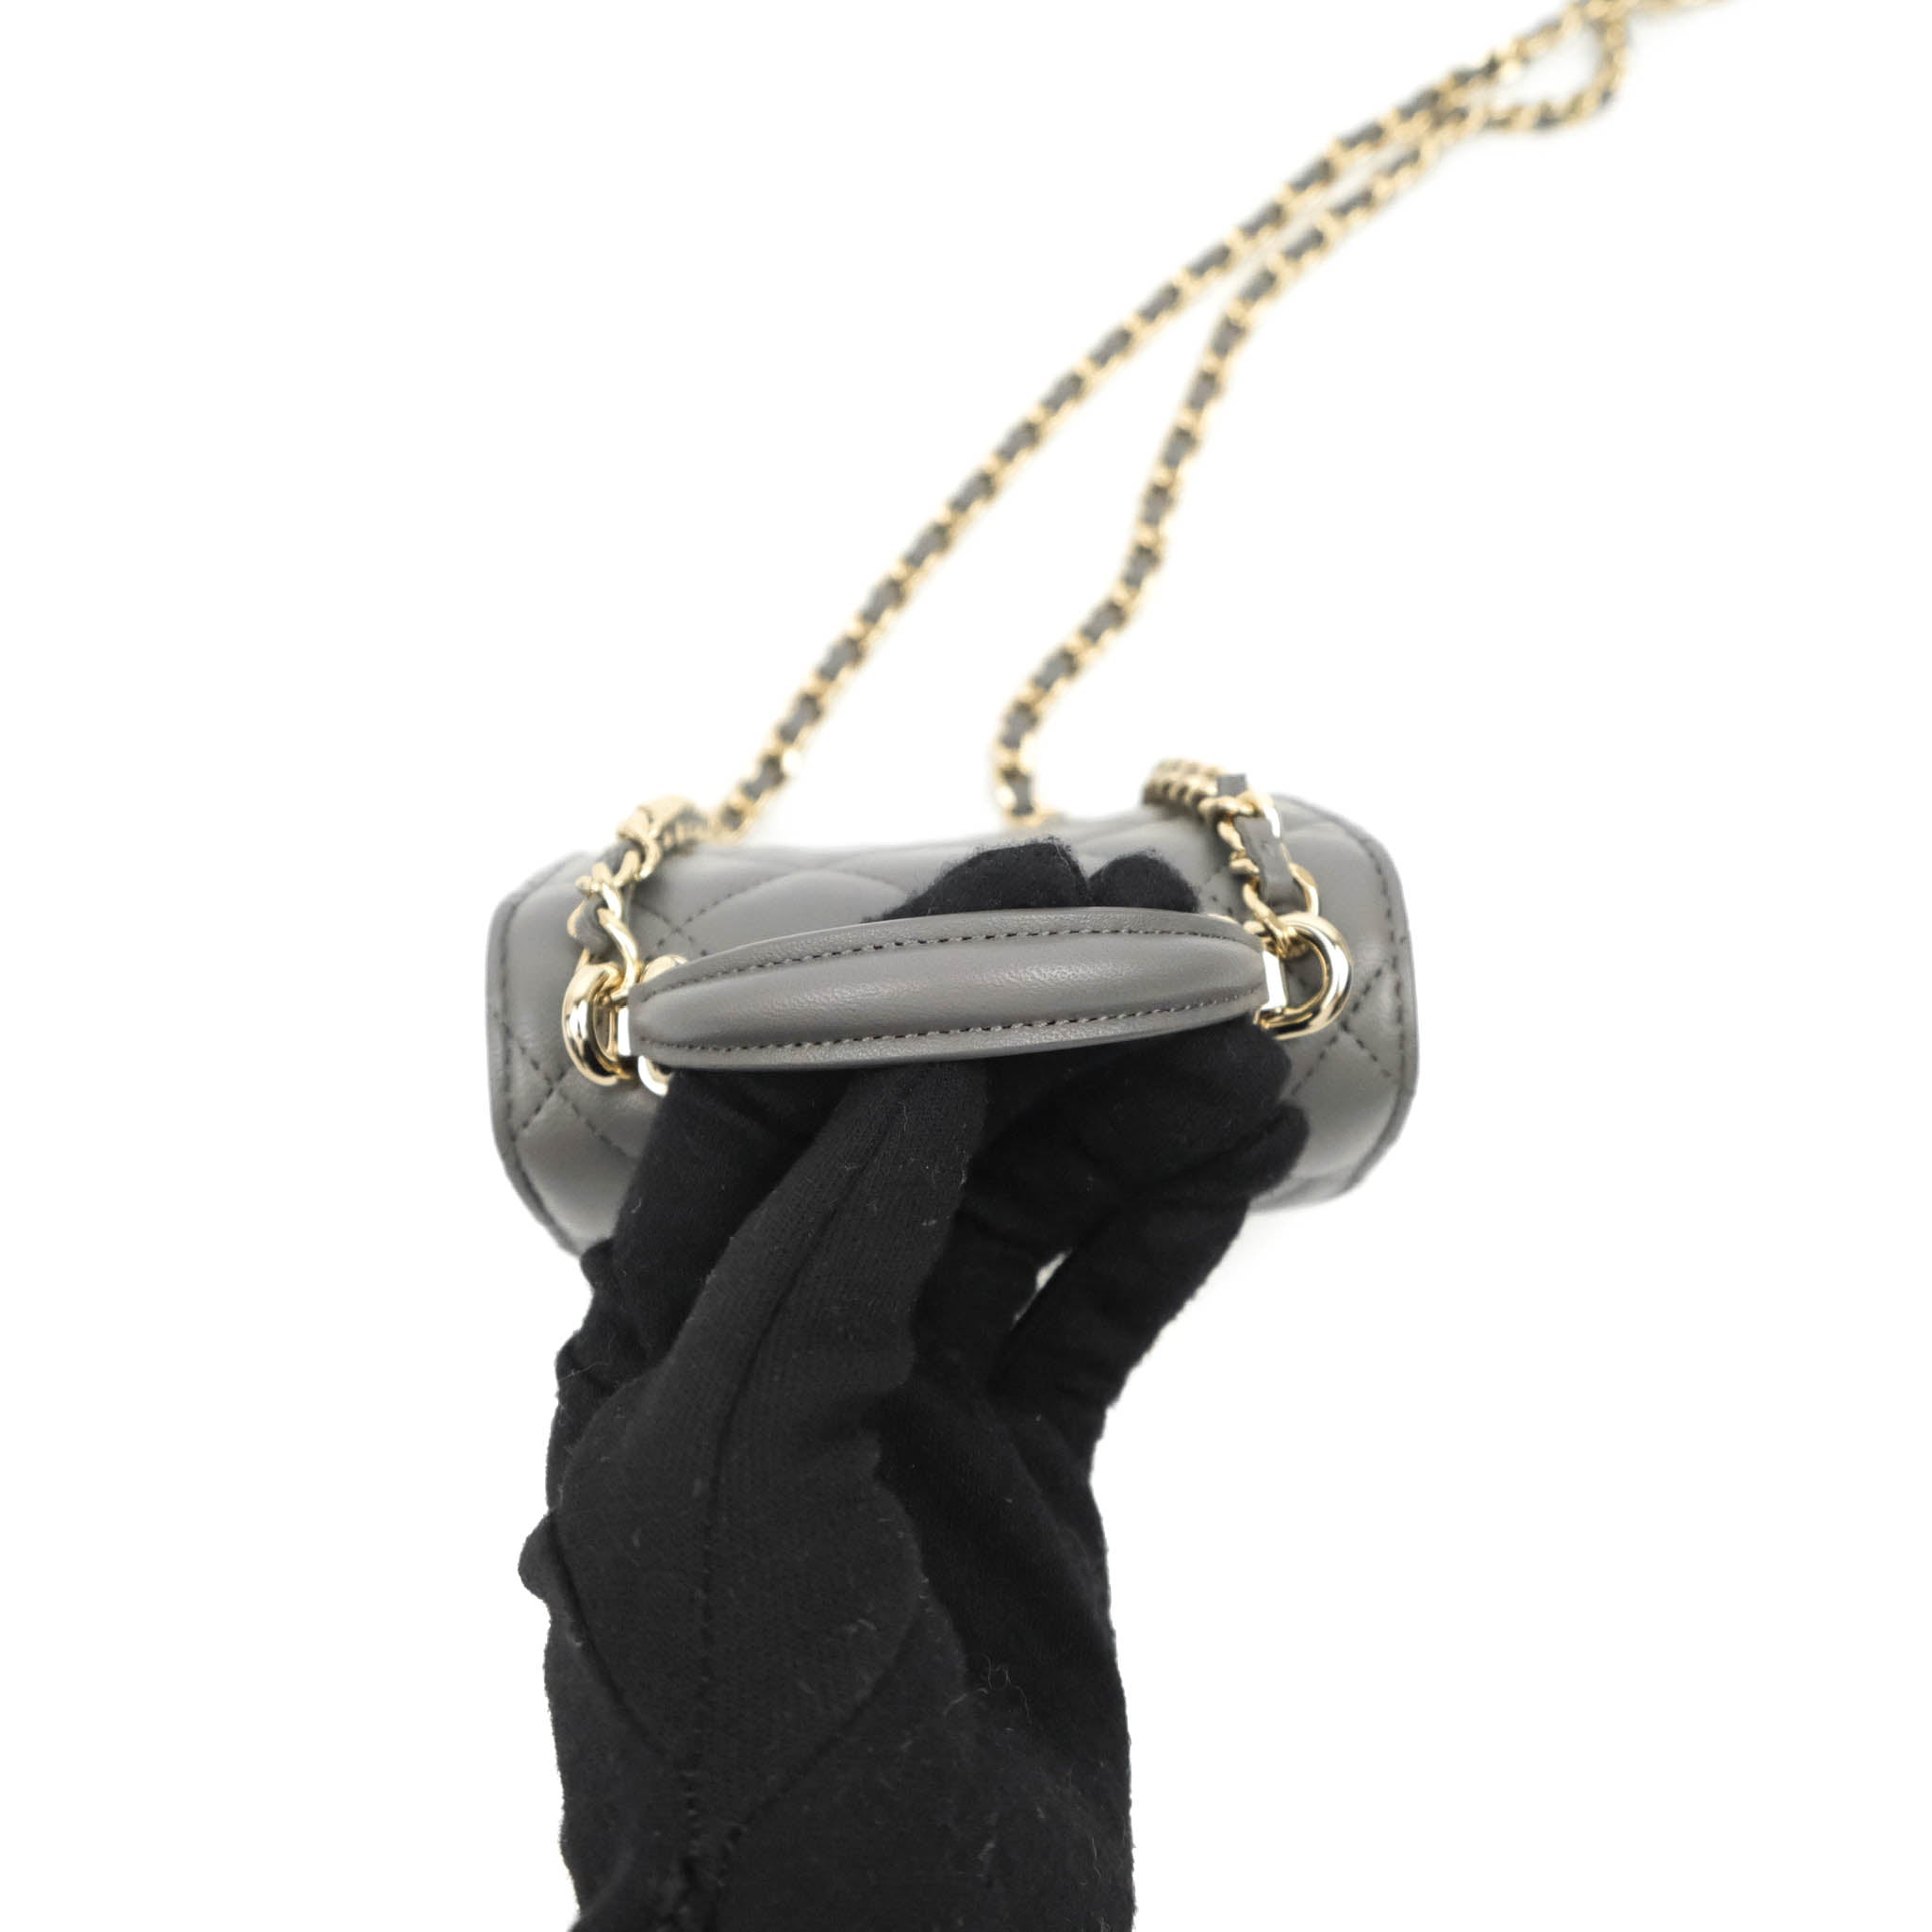 CHANEL Caviar Quilted Small Clutch With Chain Black, FASHIONPHILE